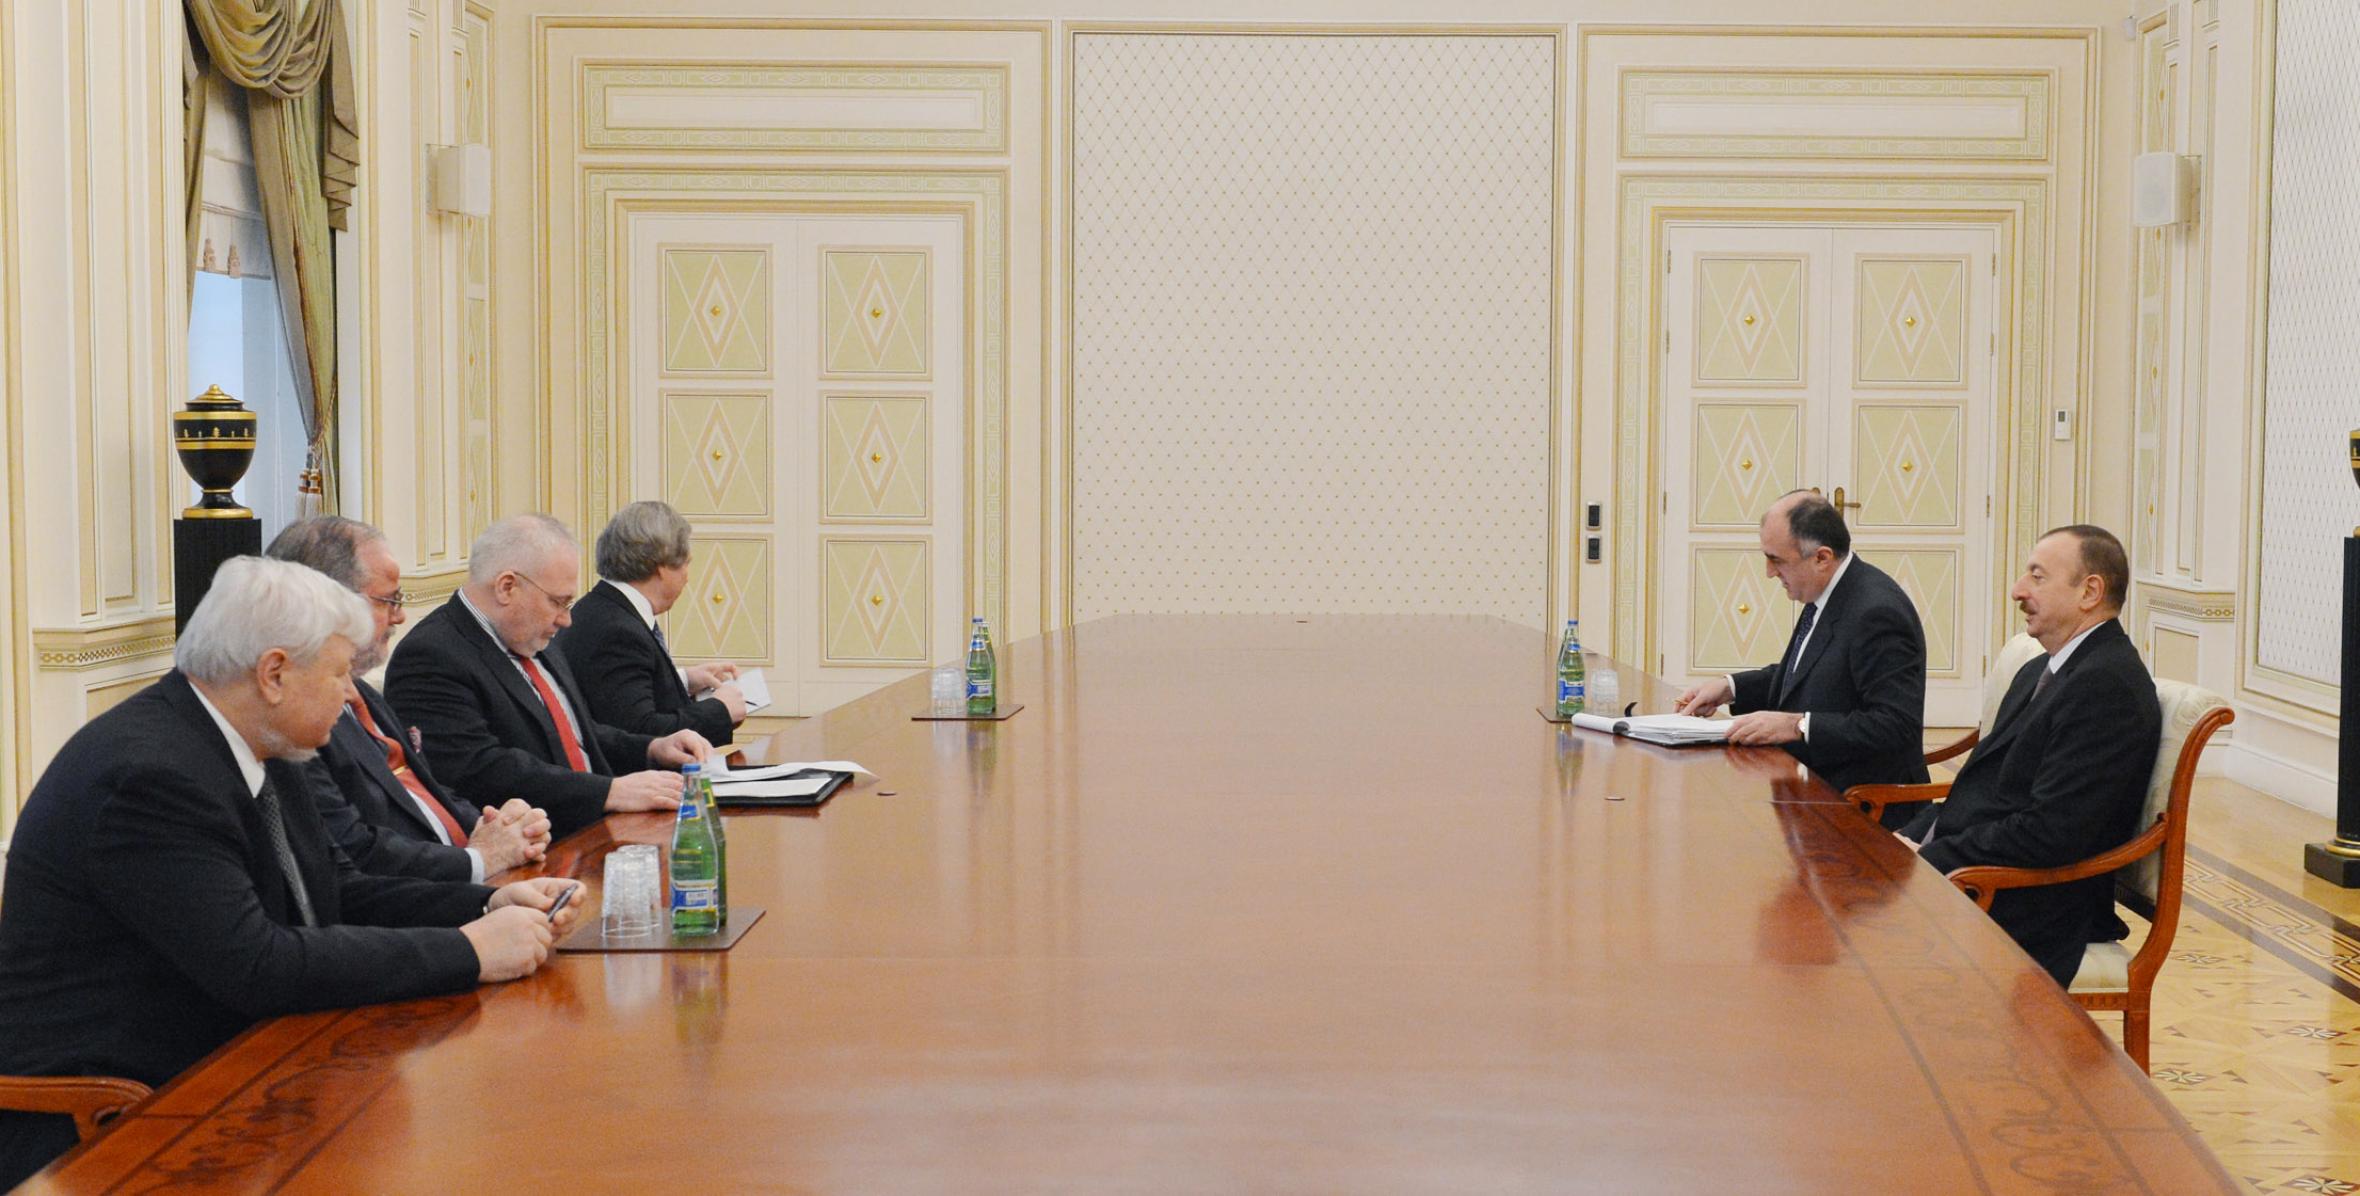 Ilham Aliyev received the co-chairmen of the OSCE Minsk Group and the Special Representative of the OSCE Chairman-in-Office